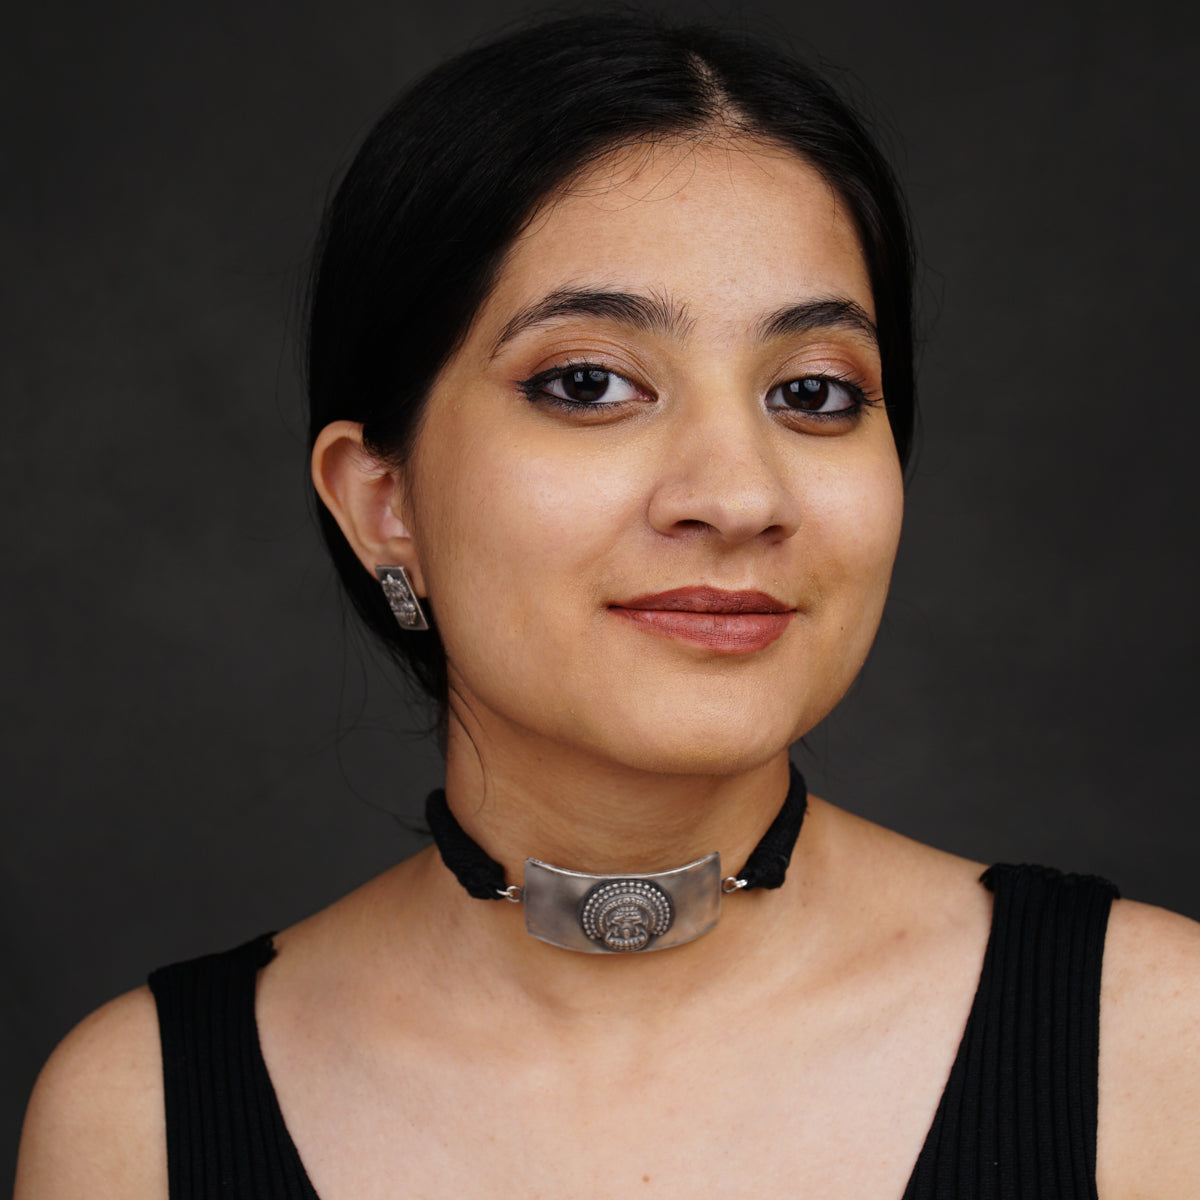 a woman wearing a black top and a silver choker